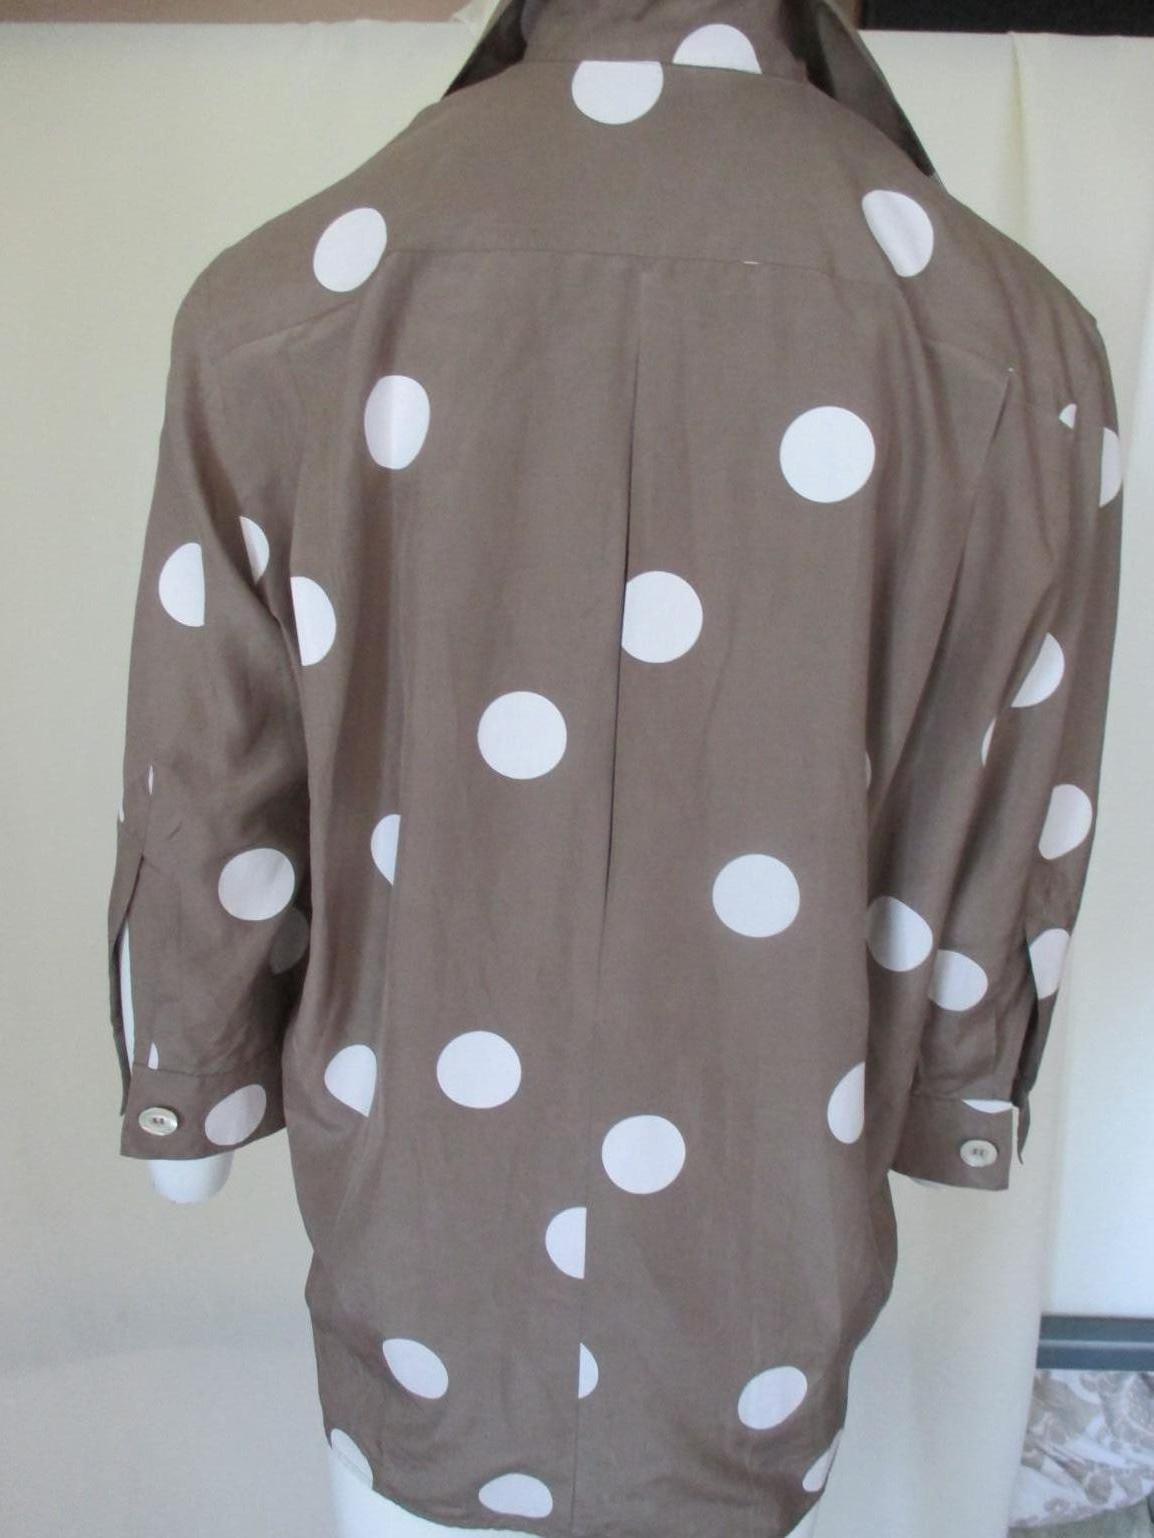 Gianfranco Ferre 80's Grand Polka Dot Silk Blouse/Jacket In Good Condition For Sale In Amsterdam, NL